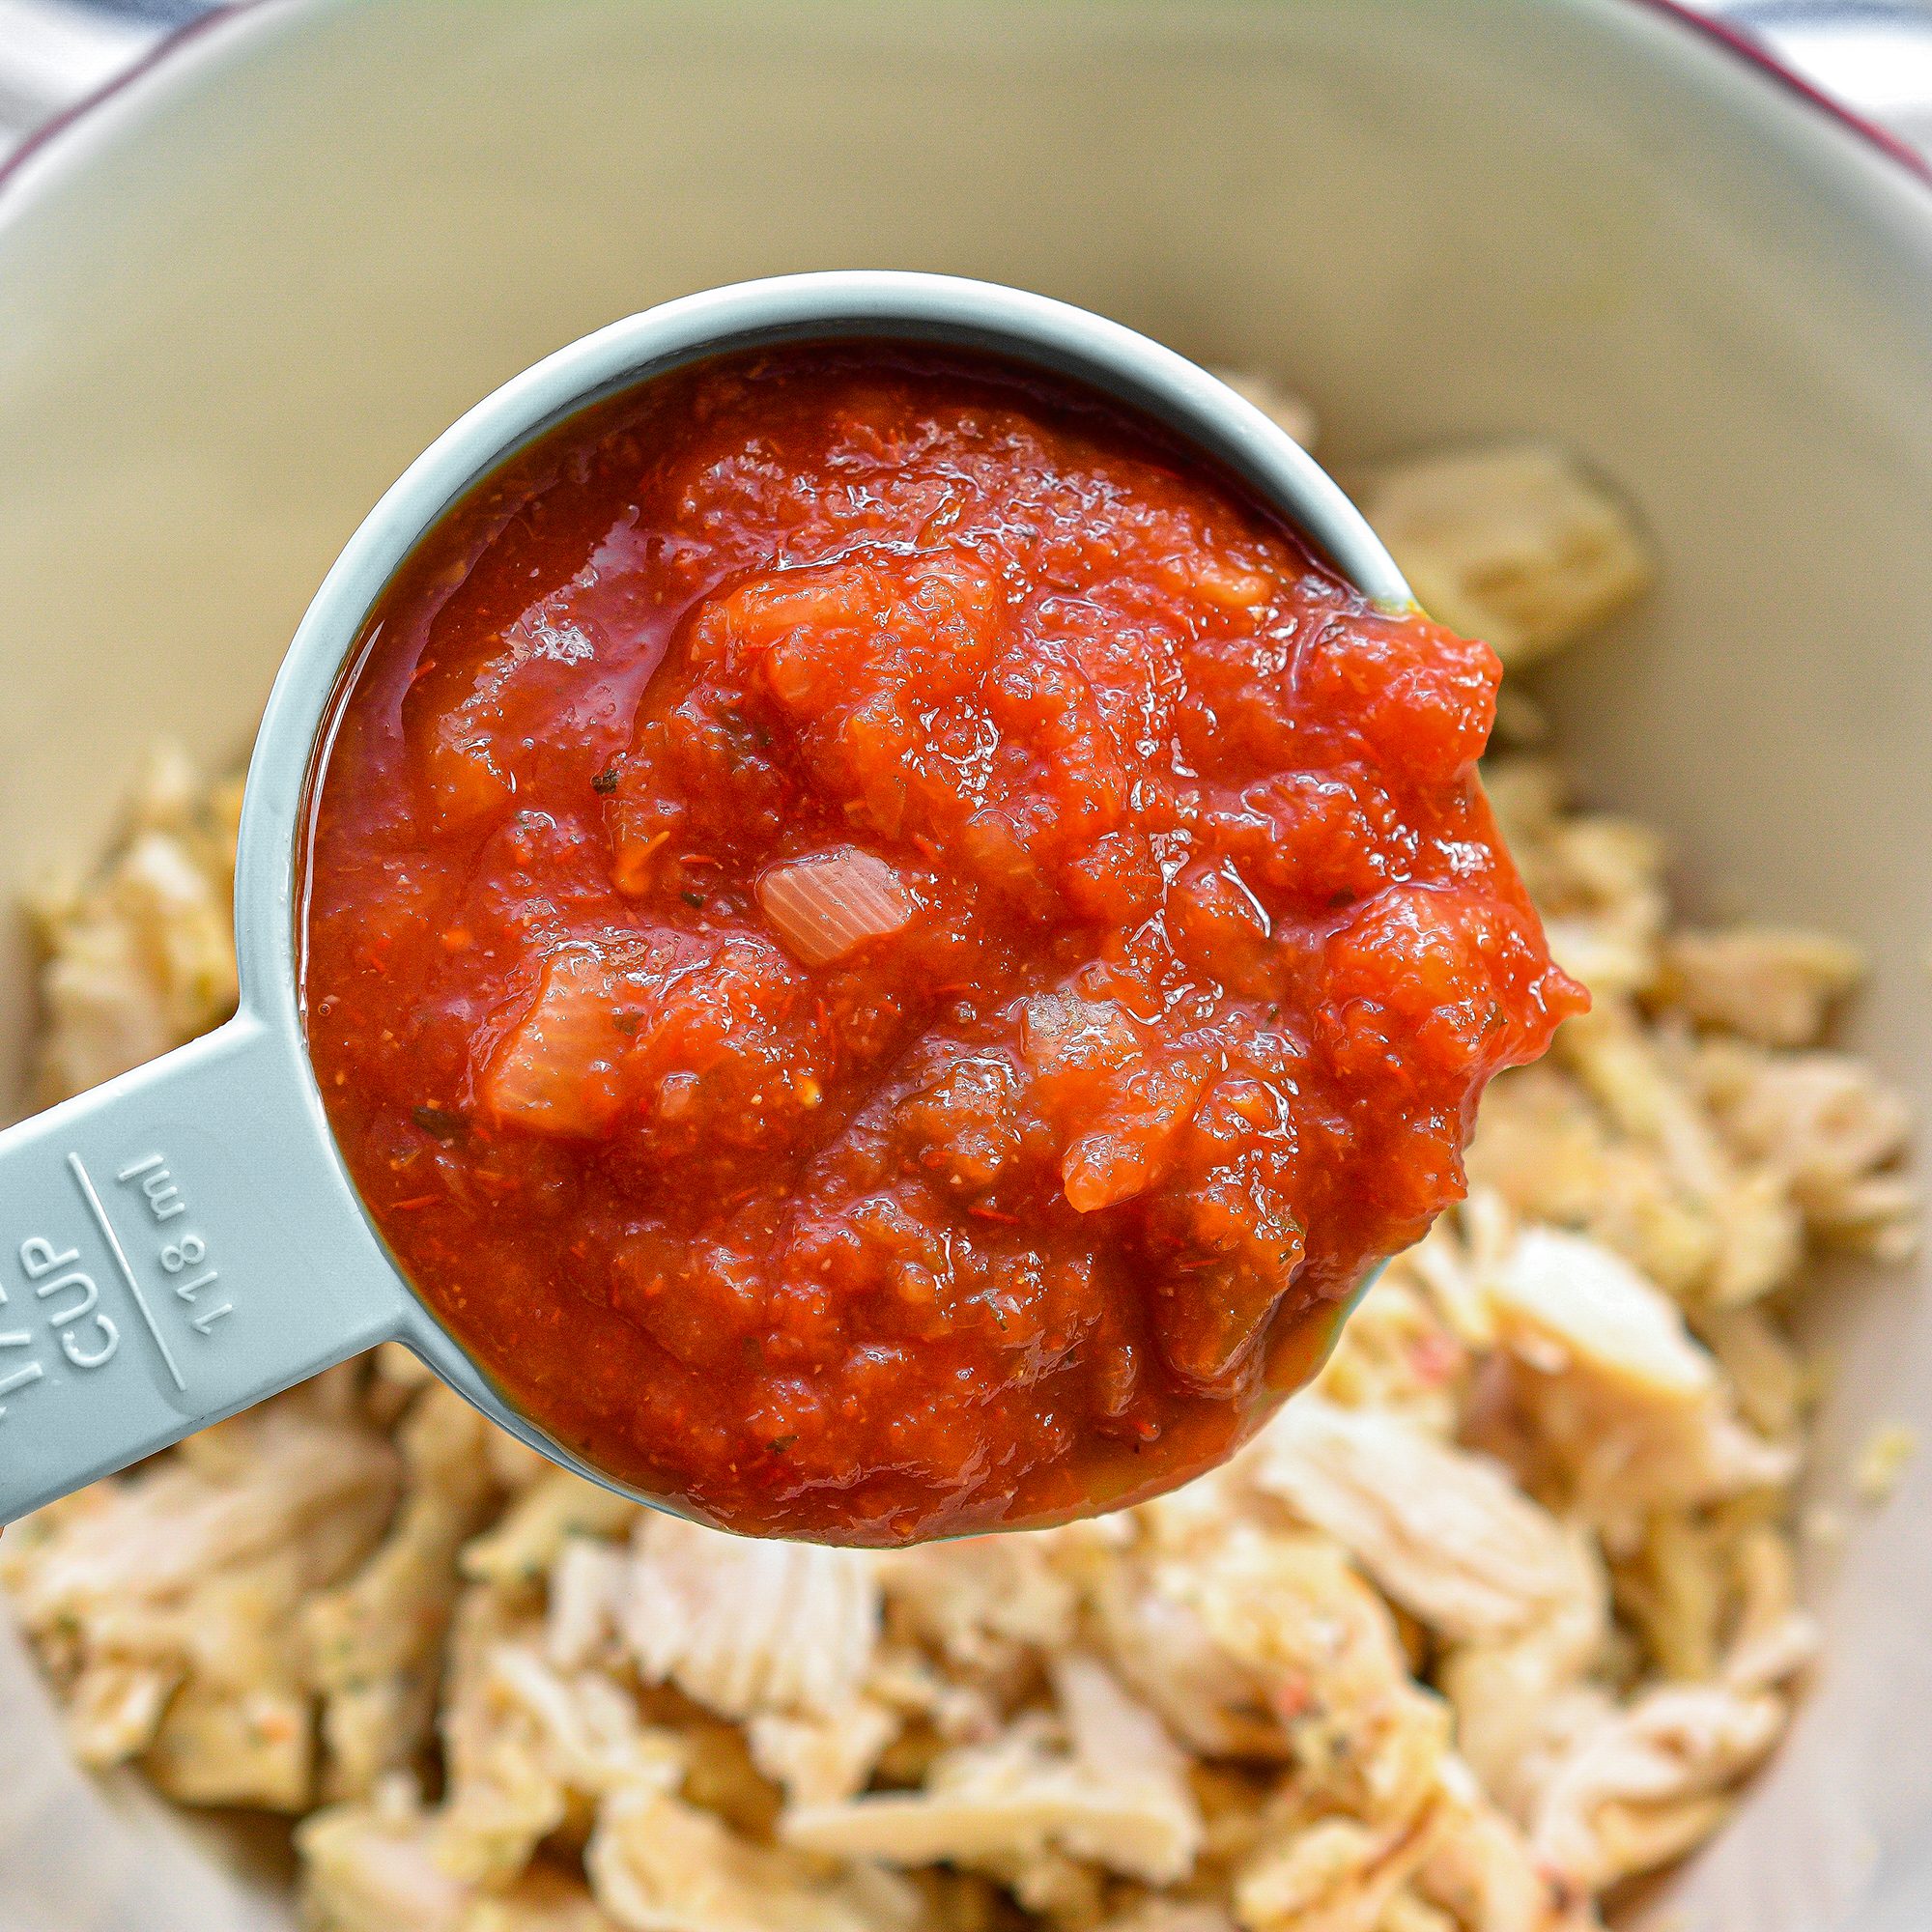 In a bowl, combine the chicken and salsa.